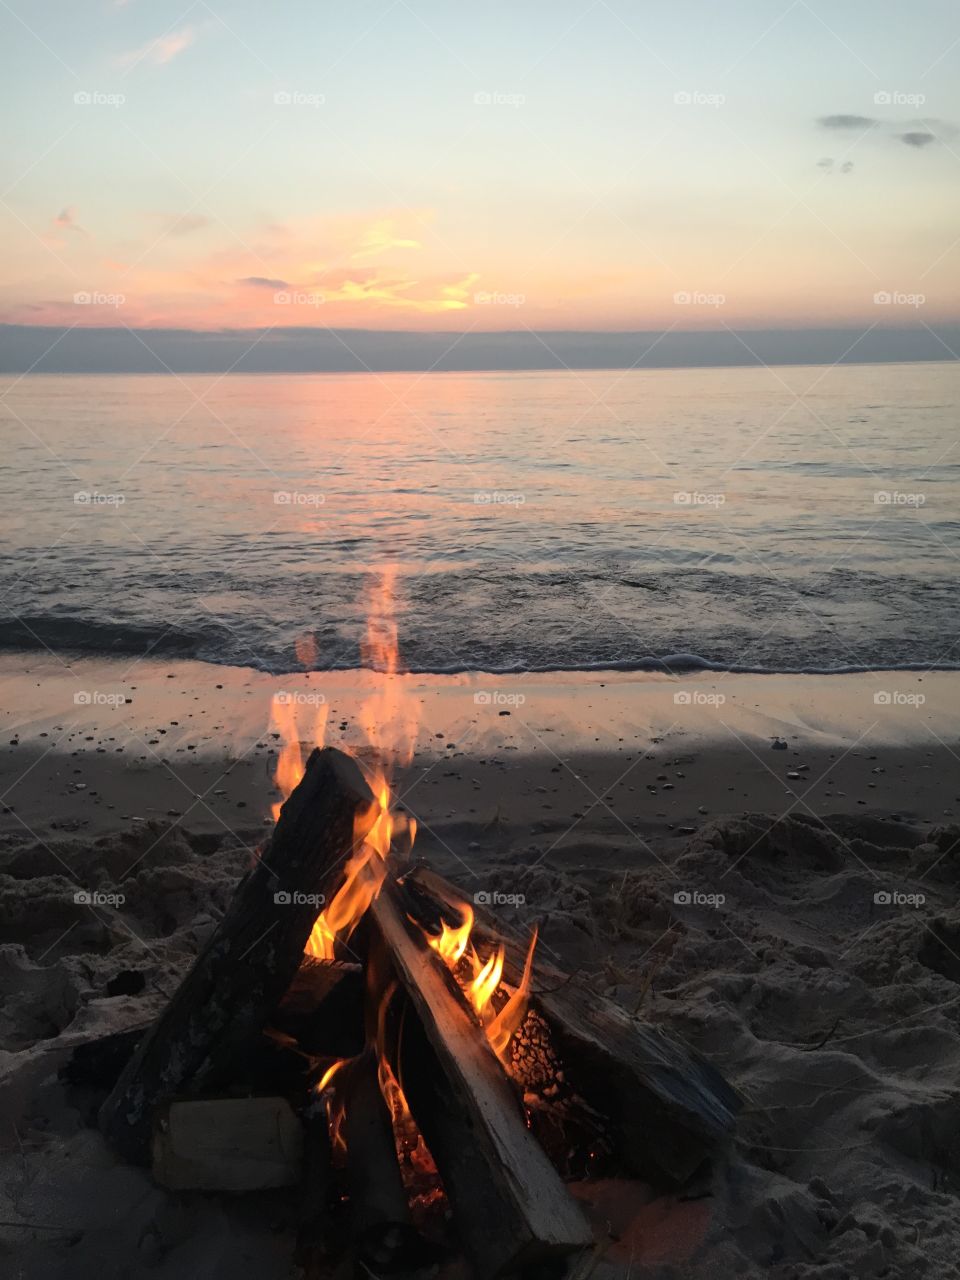 Esch Rd fire. One of my favorite ways to cook dinner is over an open fire on Lake Michigan beach